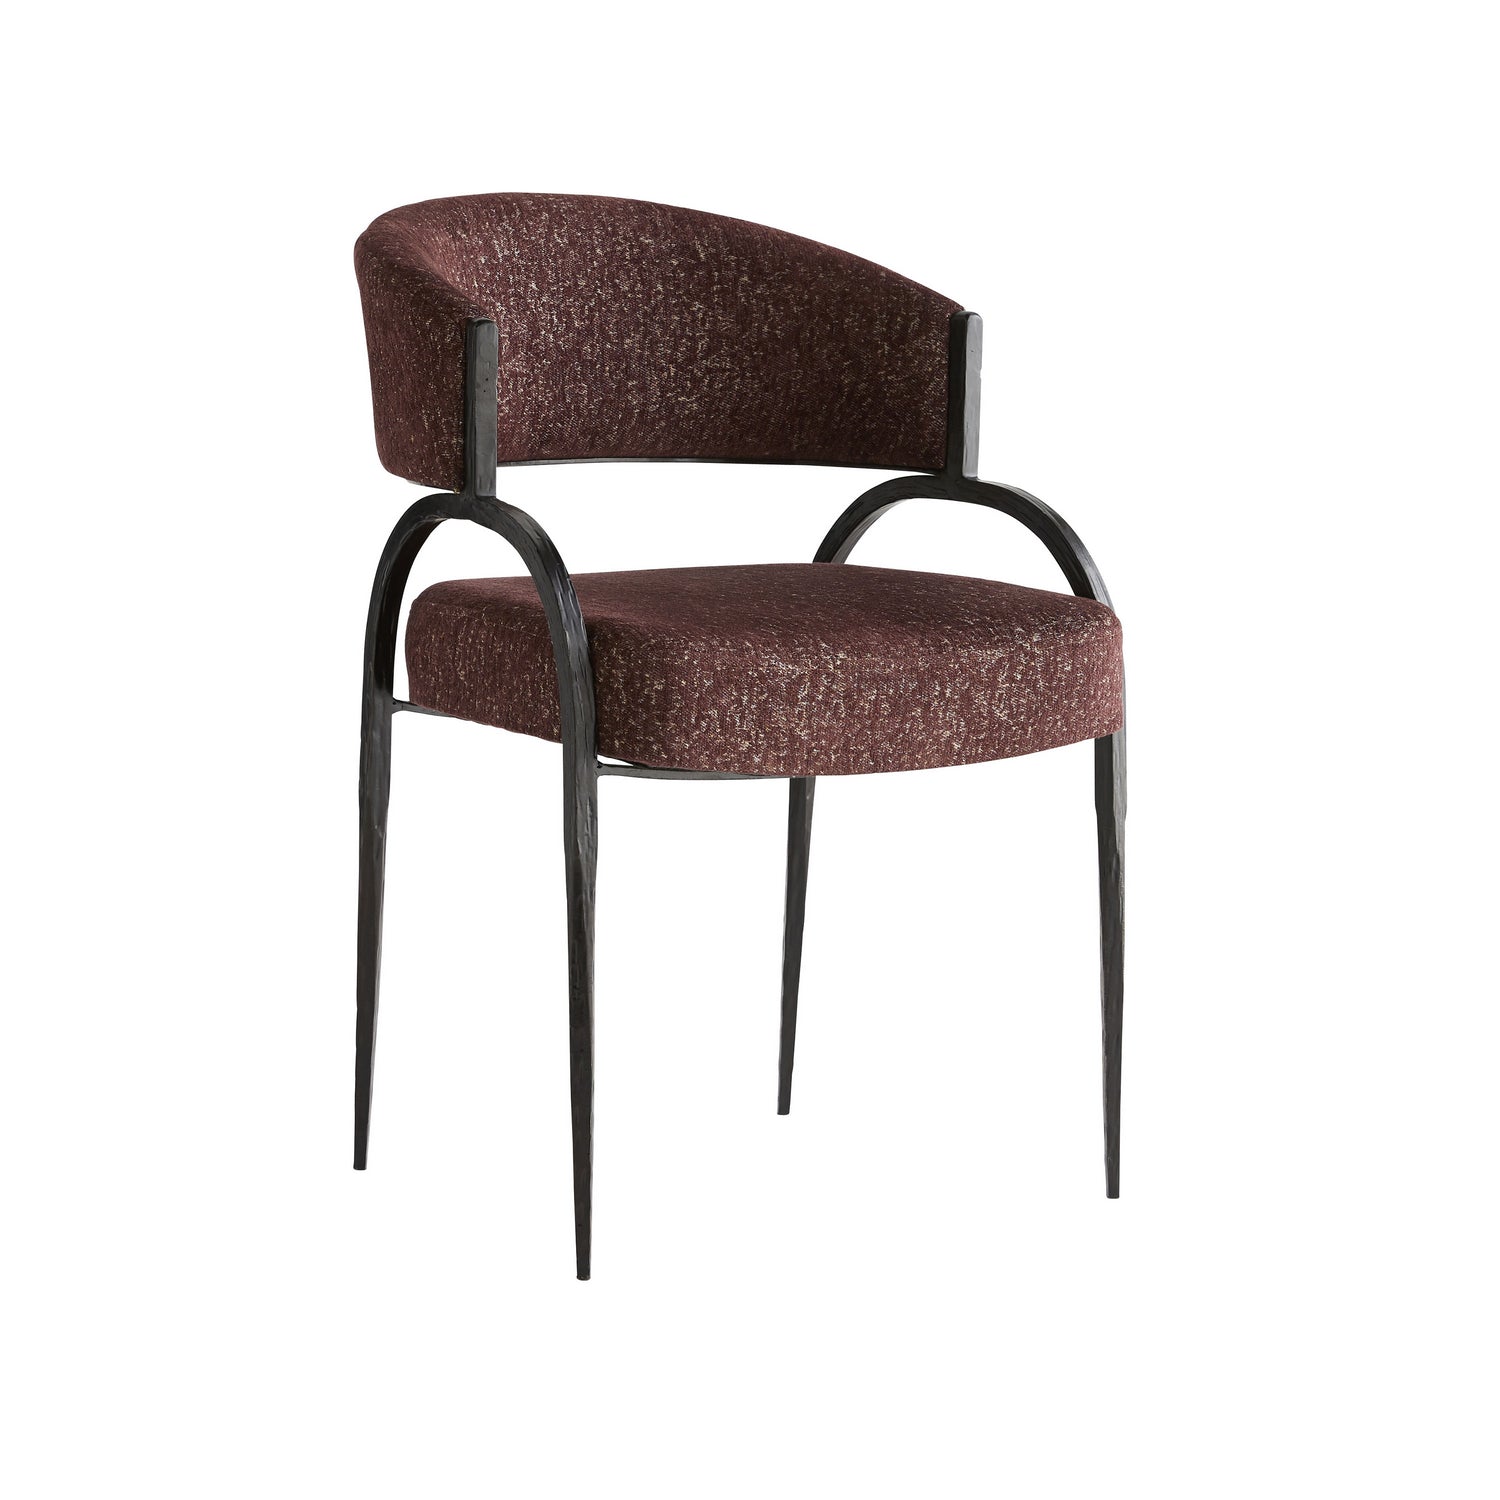 Chair from the Bahati collection in Bordeaux finish